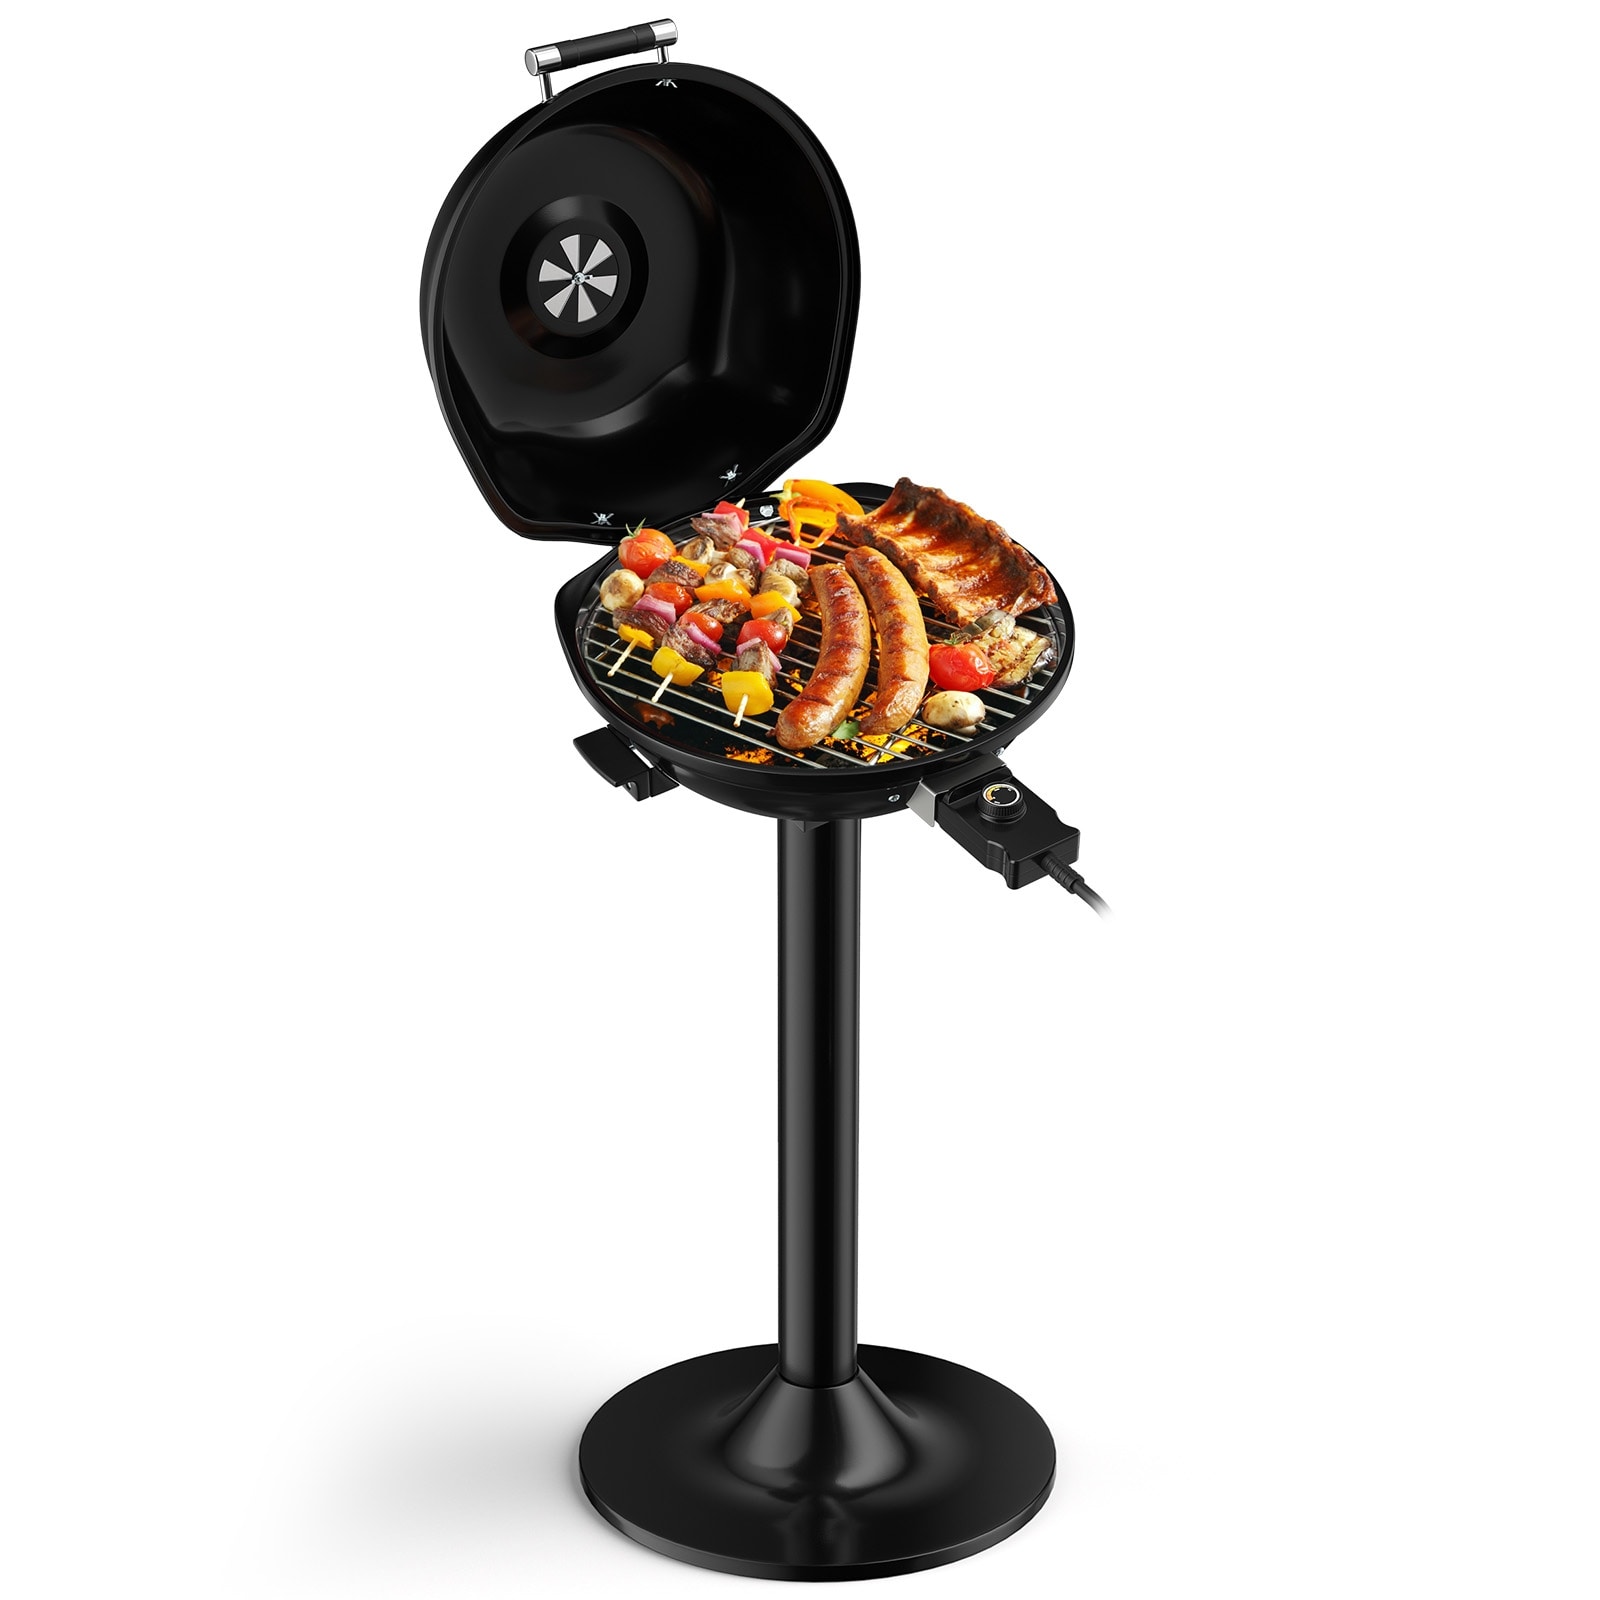 https://ak1.ostkcdn.com/images/products/is/images/direct/1b0a8db8a2d5bb36eeadfbc82fa653086b2b5800/1600W-Portable-Electric-BBQ-Grill-with-Removable-Non-Stick-Rack.jpg